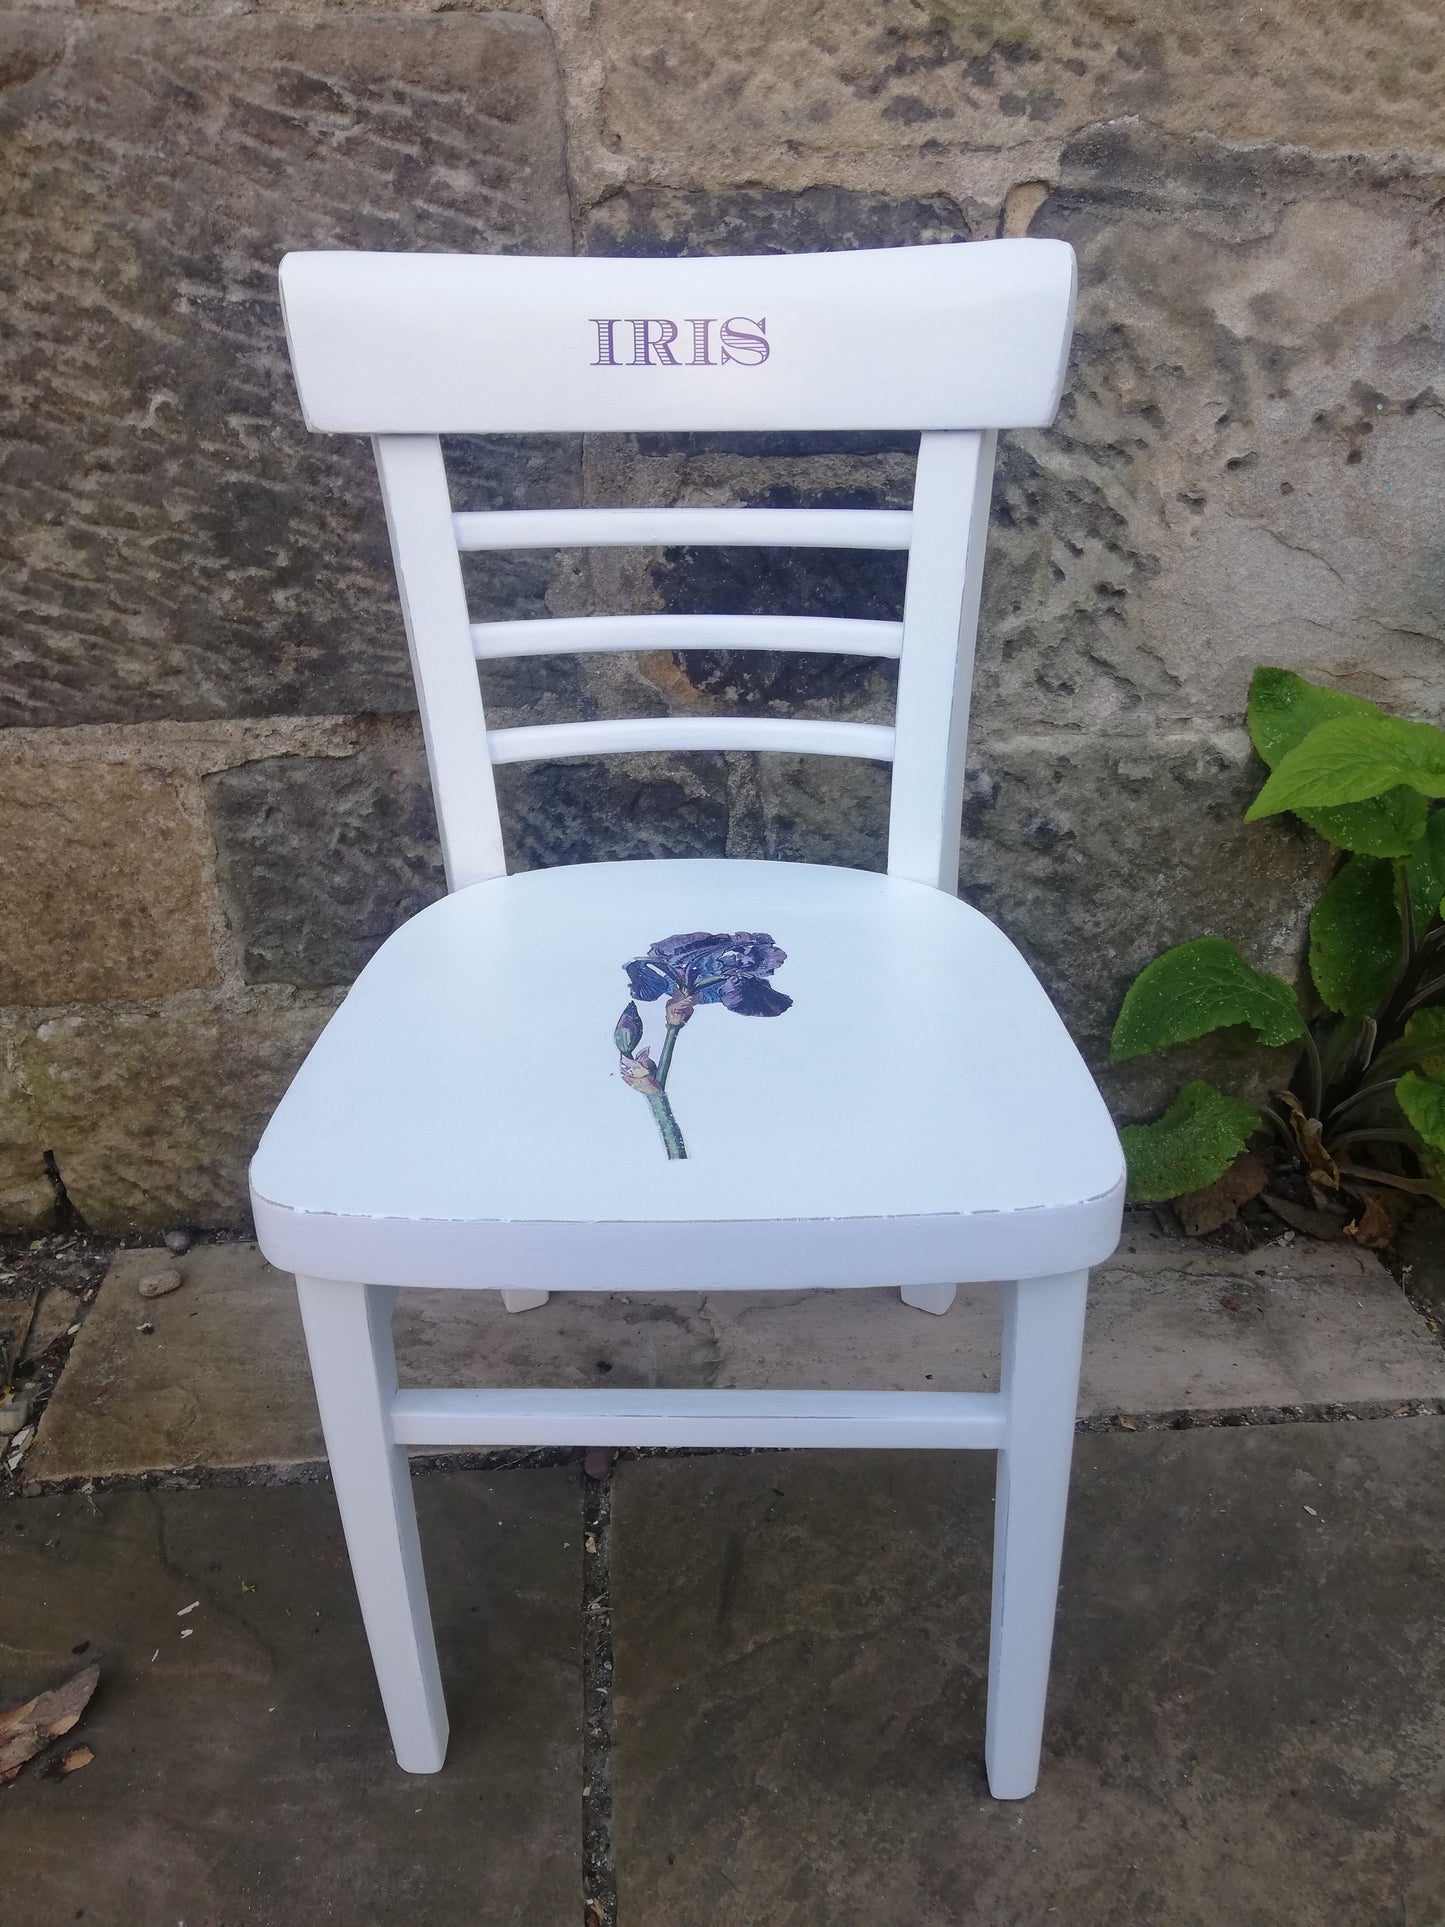 Children's personalised vintage school chair with vintage flower theme.